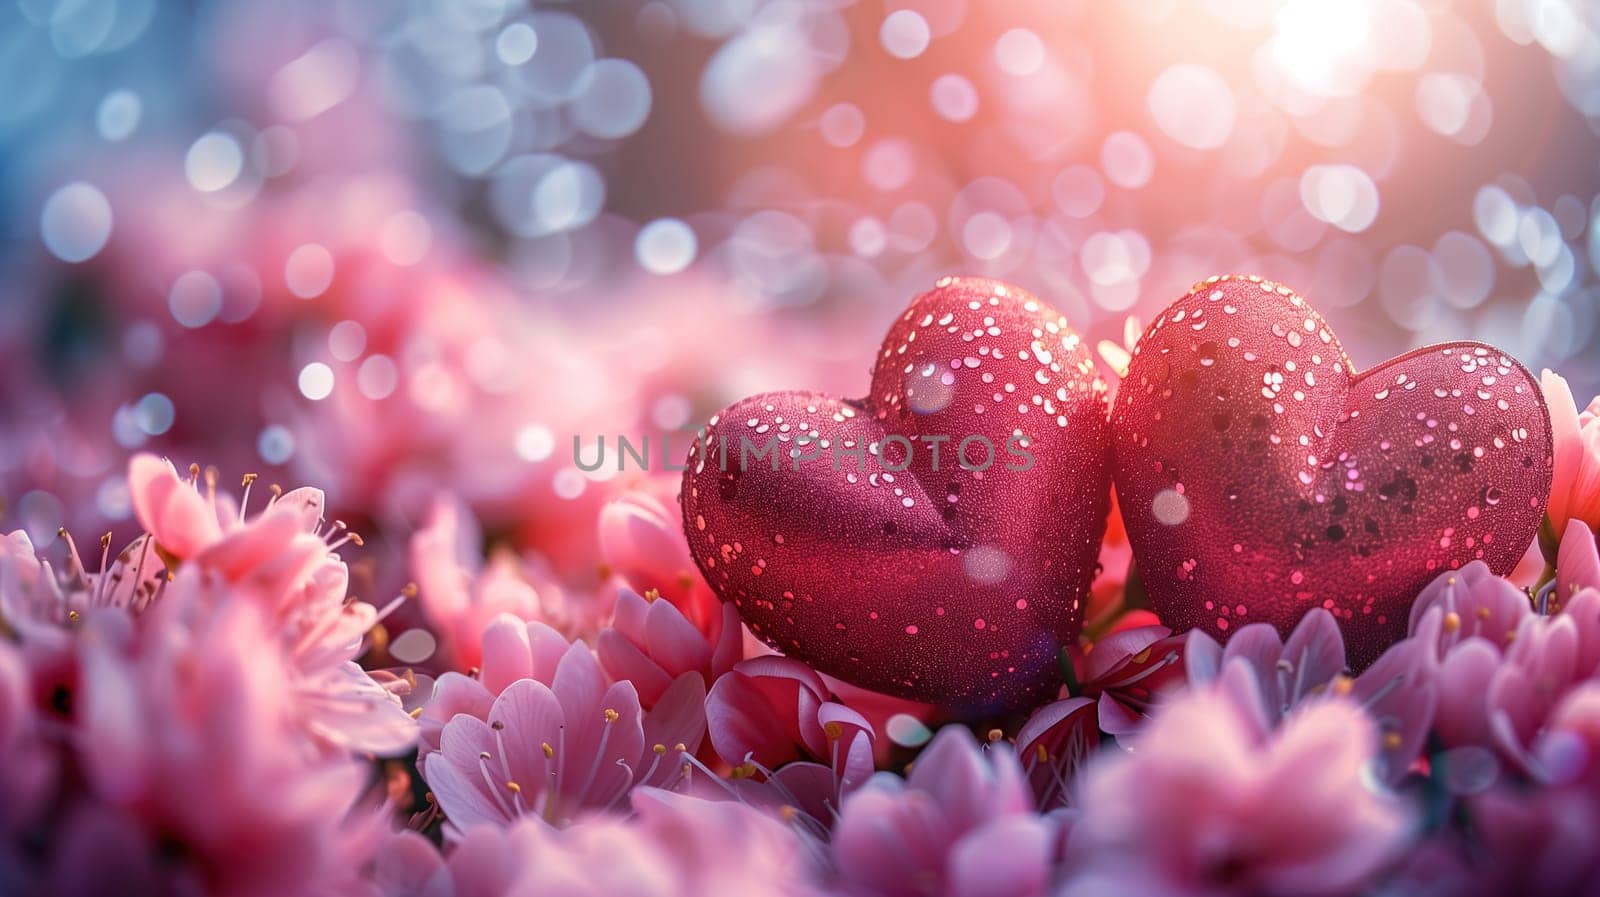 A vibrant display of affection at an International Mothers Day concert features heart-shaped ornaments with delicate water droplets nestled in a bed of pink blossoming flowers, illuminated by a soft glowing light that creates a warm, celebratory atmosphere.